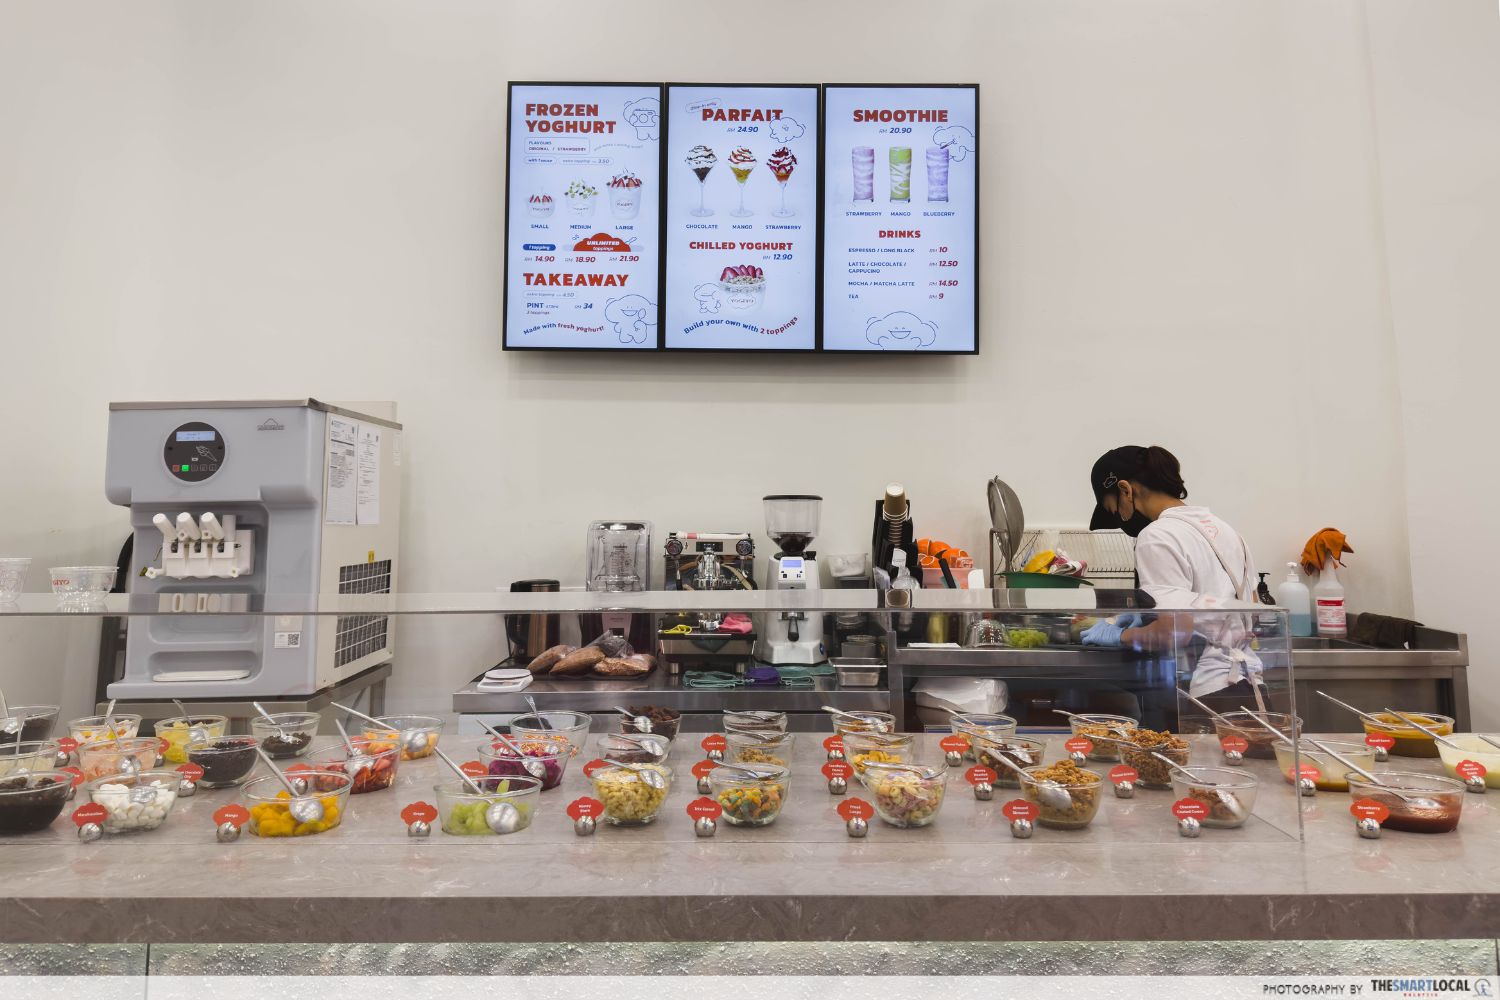 the counter view of yogiyo, with bowls of toppings arranged neatly on the countertop, and the menu on the wall, the staff is prepping the ingredients